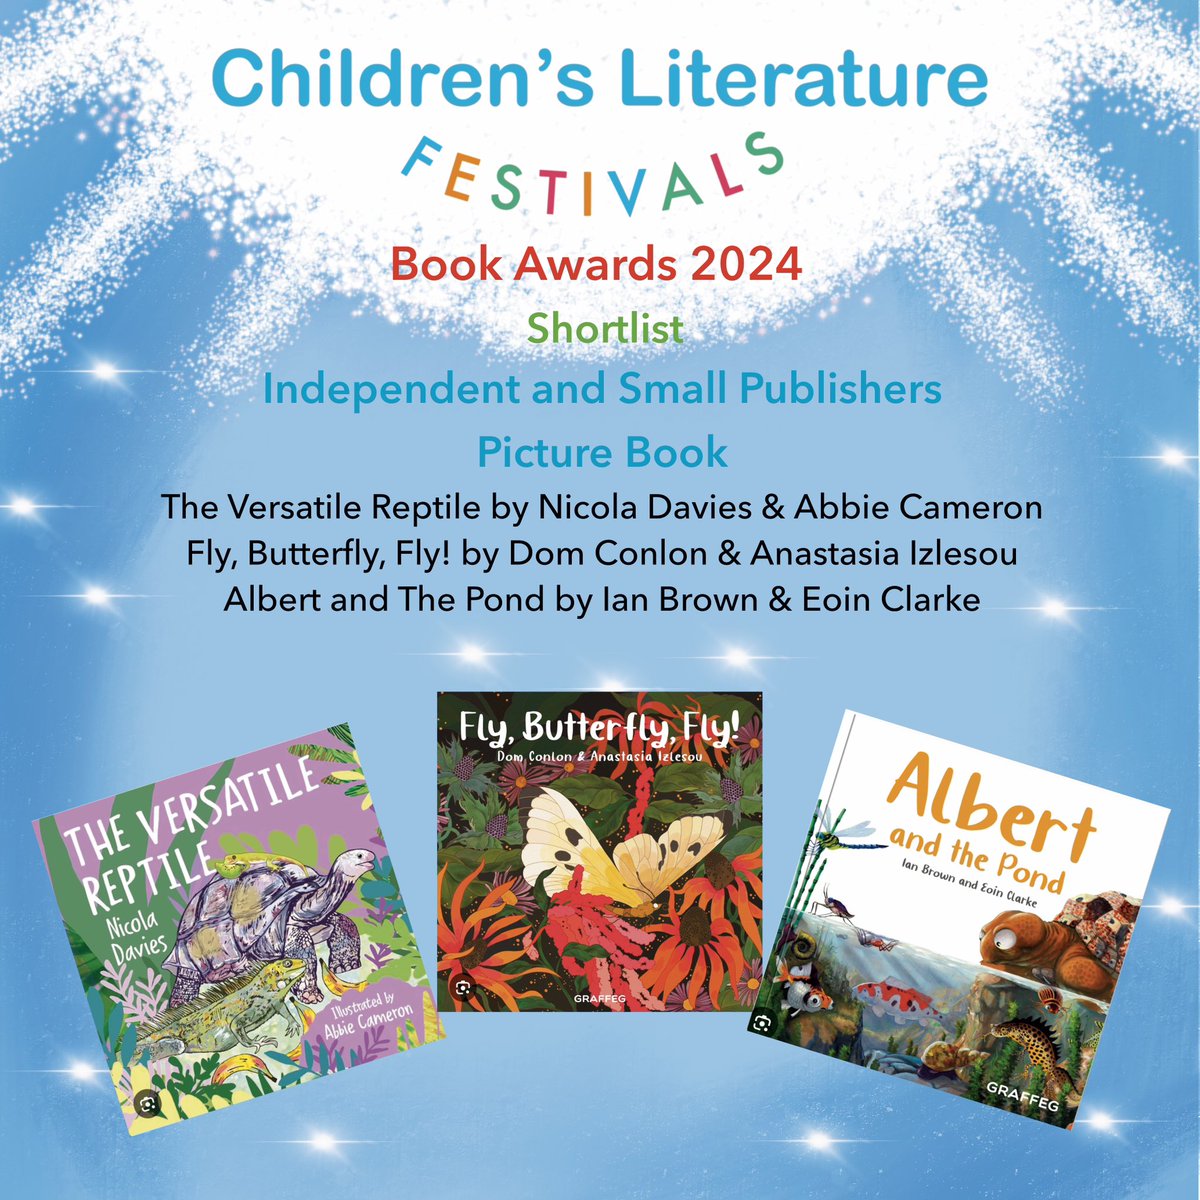 🥁🥁🥁 The shortlist for our 2023/4 #clfbookawards 📚Independent and small publisher #picturebook are - The Versatile Reptile by Nicola Davies & Abbie Cameron, Fly, Butterfly, Fly! by @dom_conlon & Anastasia Izlesou, & Albert and the Pond by @IanBrownTV & Eoin Clarke. ⭐️⭐️⭐️⭐️